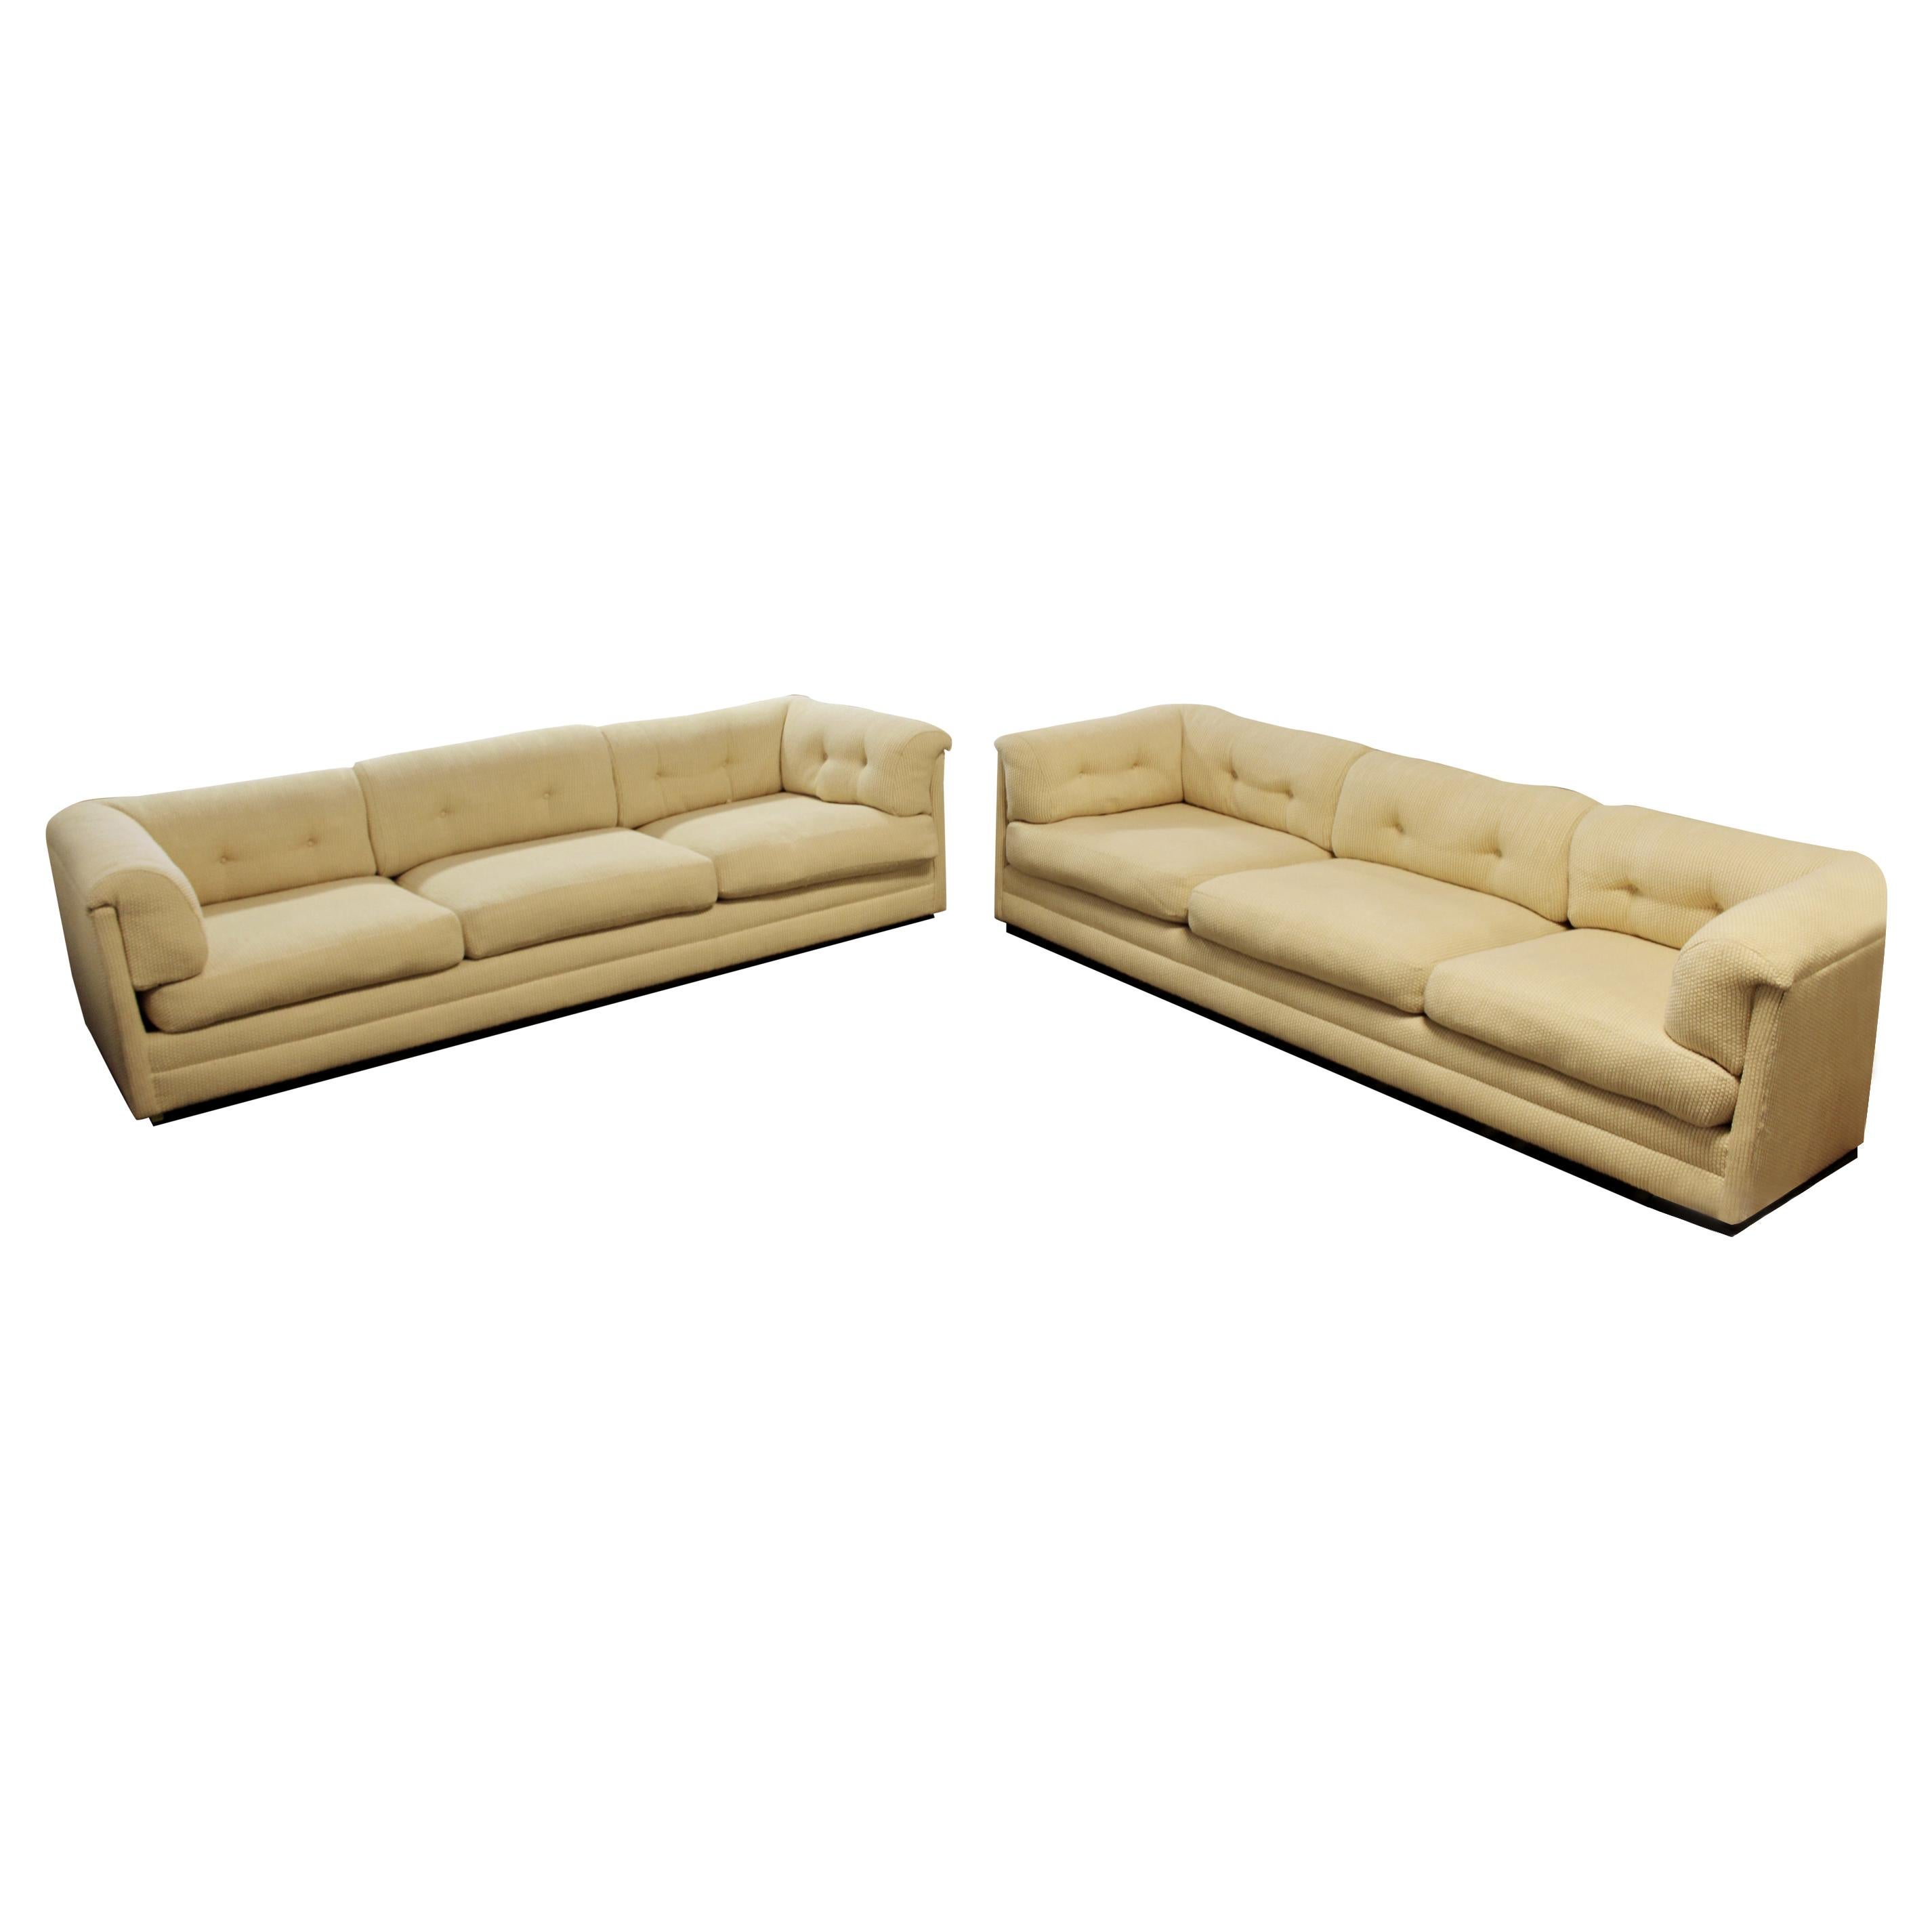 Contemporary Modernist Pair of Tufted Cream Directional Sofas, 1980s